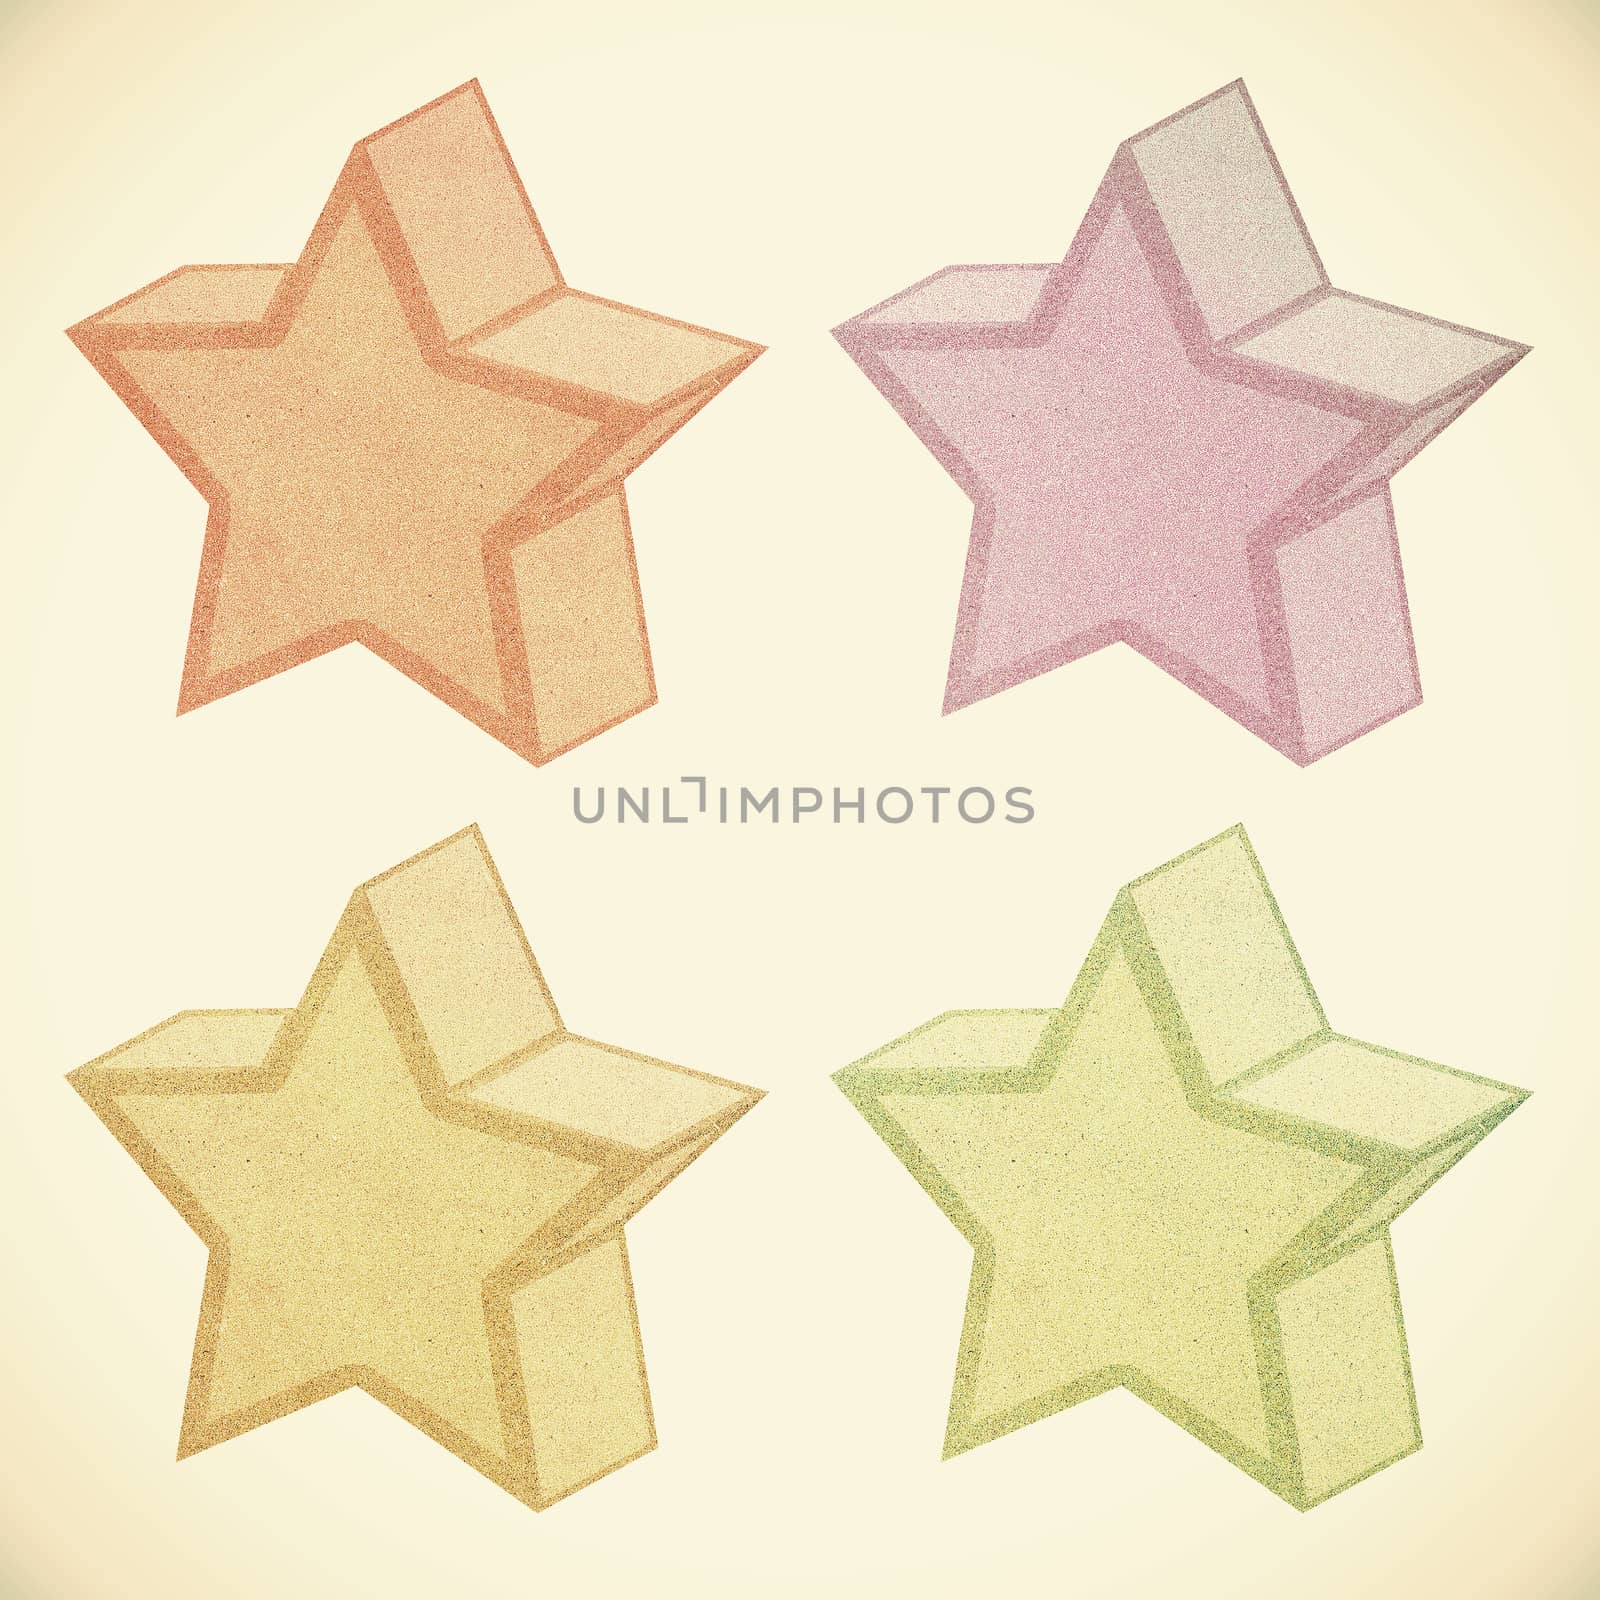 Paper texture,3D Star recycled paper on vintage tone background by jakgree